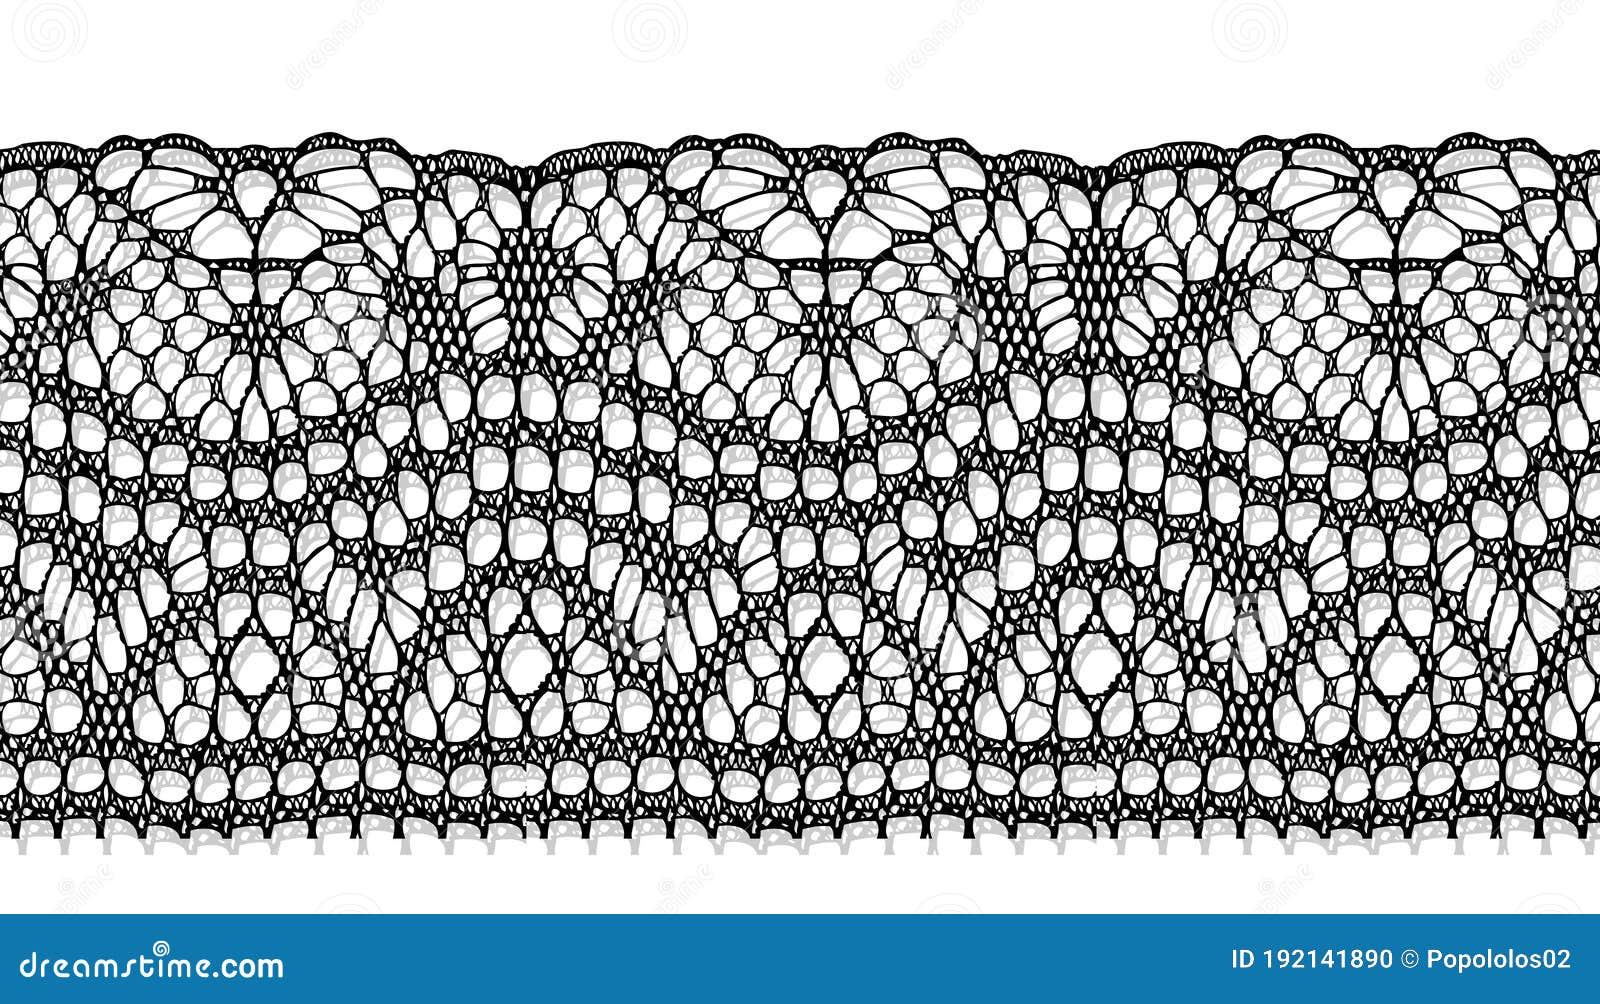 Trim Lace Ribbon for Decorating .Jacquard Mesh Lace Fabric.Vector seamless  pattern. Stock Vector